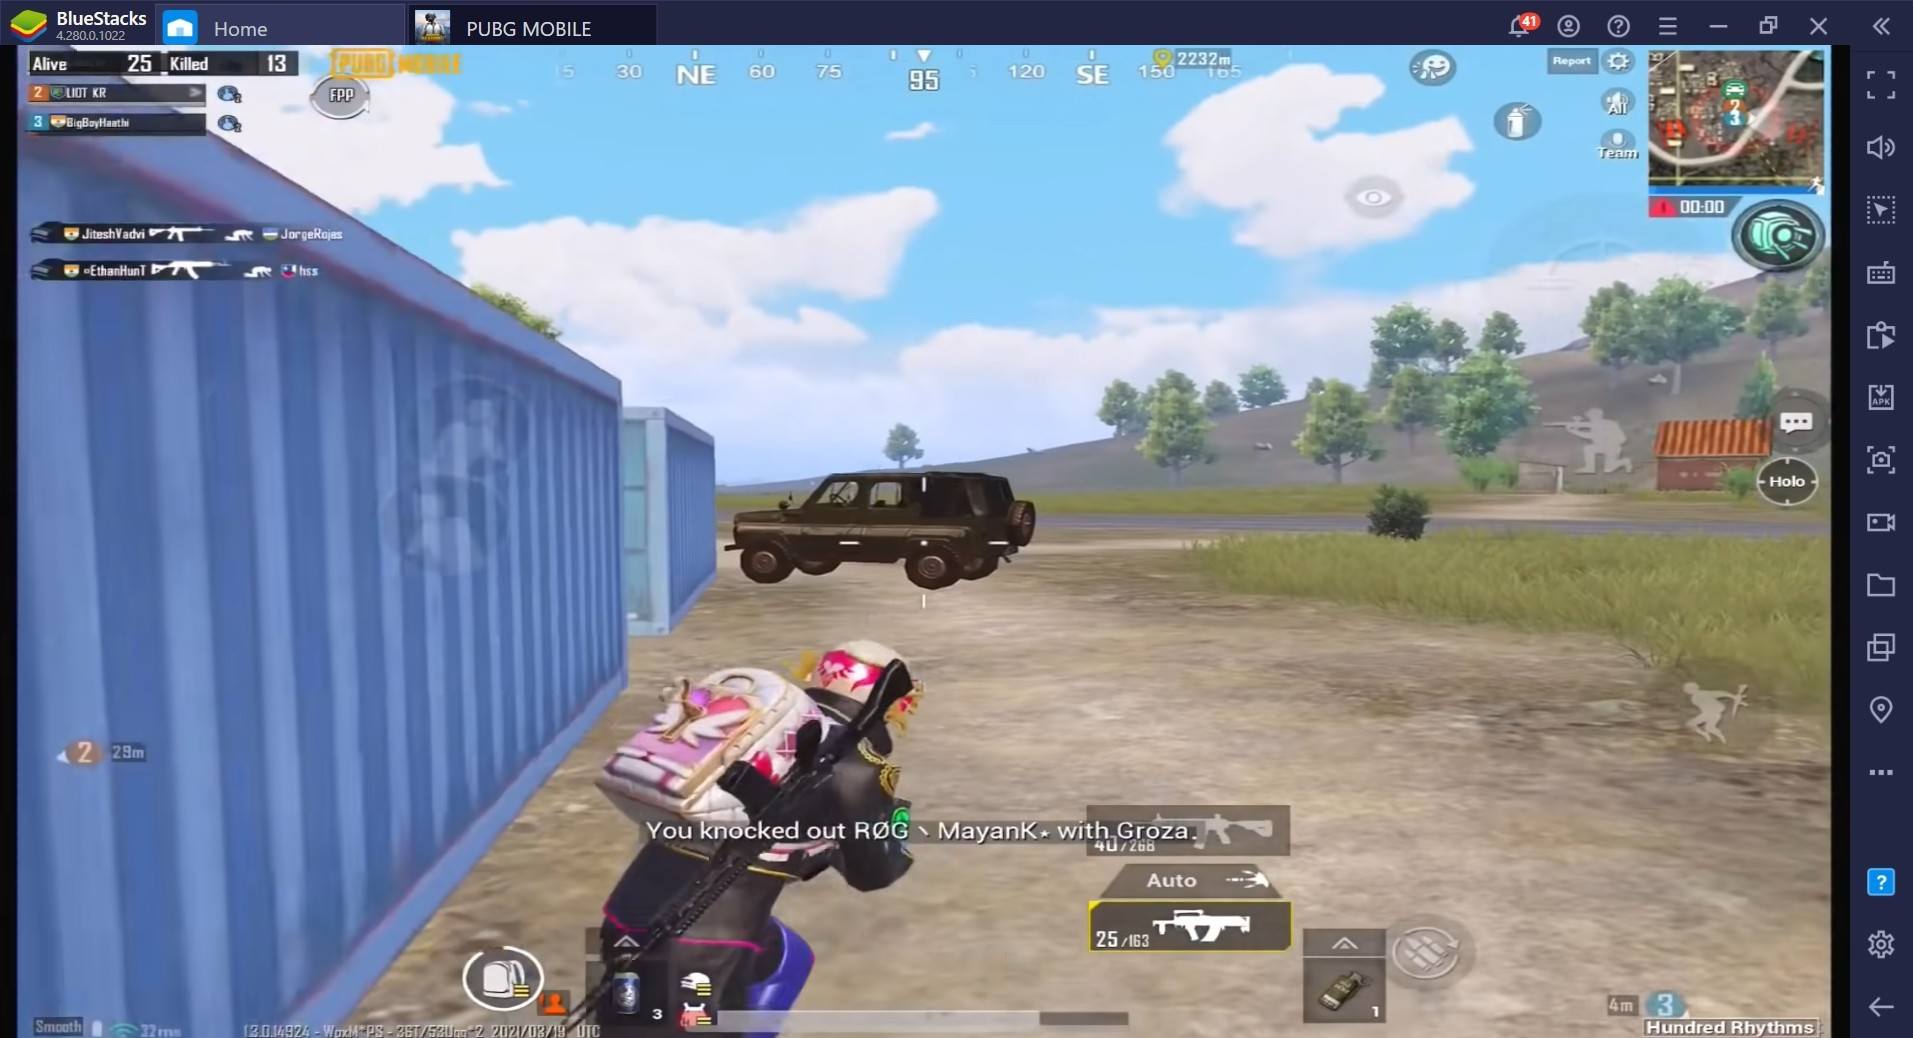 Kills On Wheels: BlueStacks Guide to Vehicles in PUBG Mobile